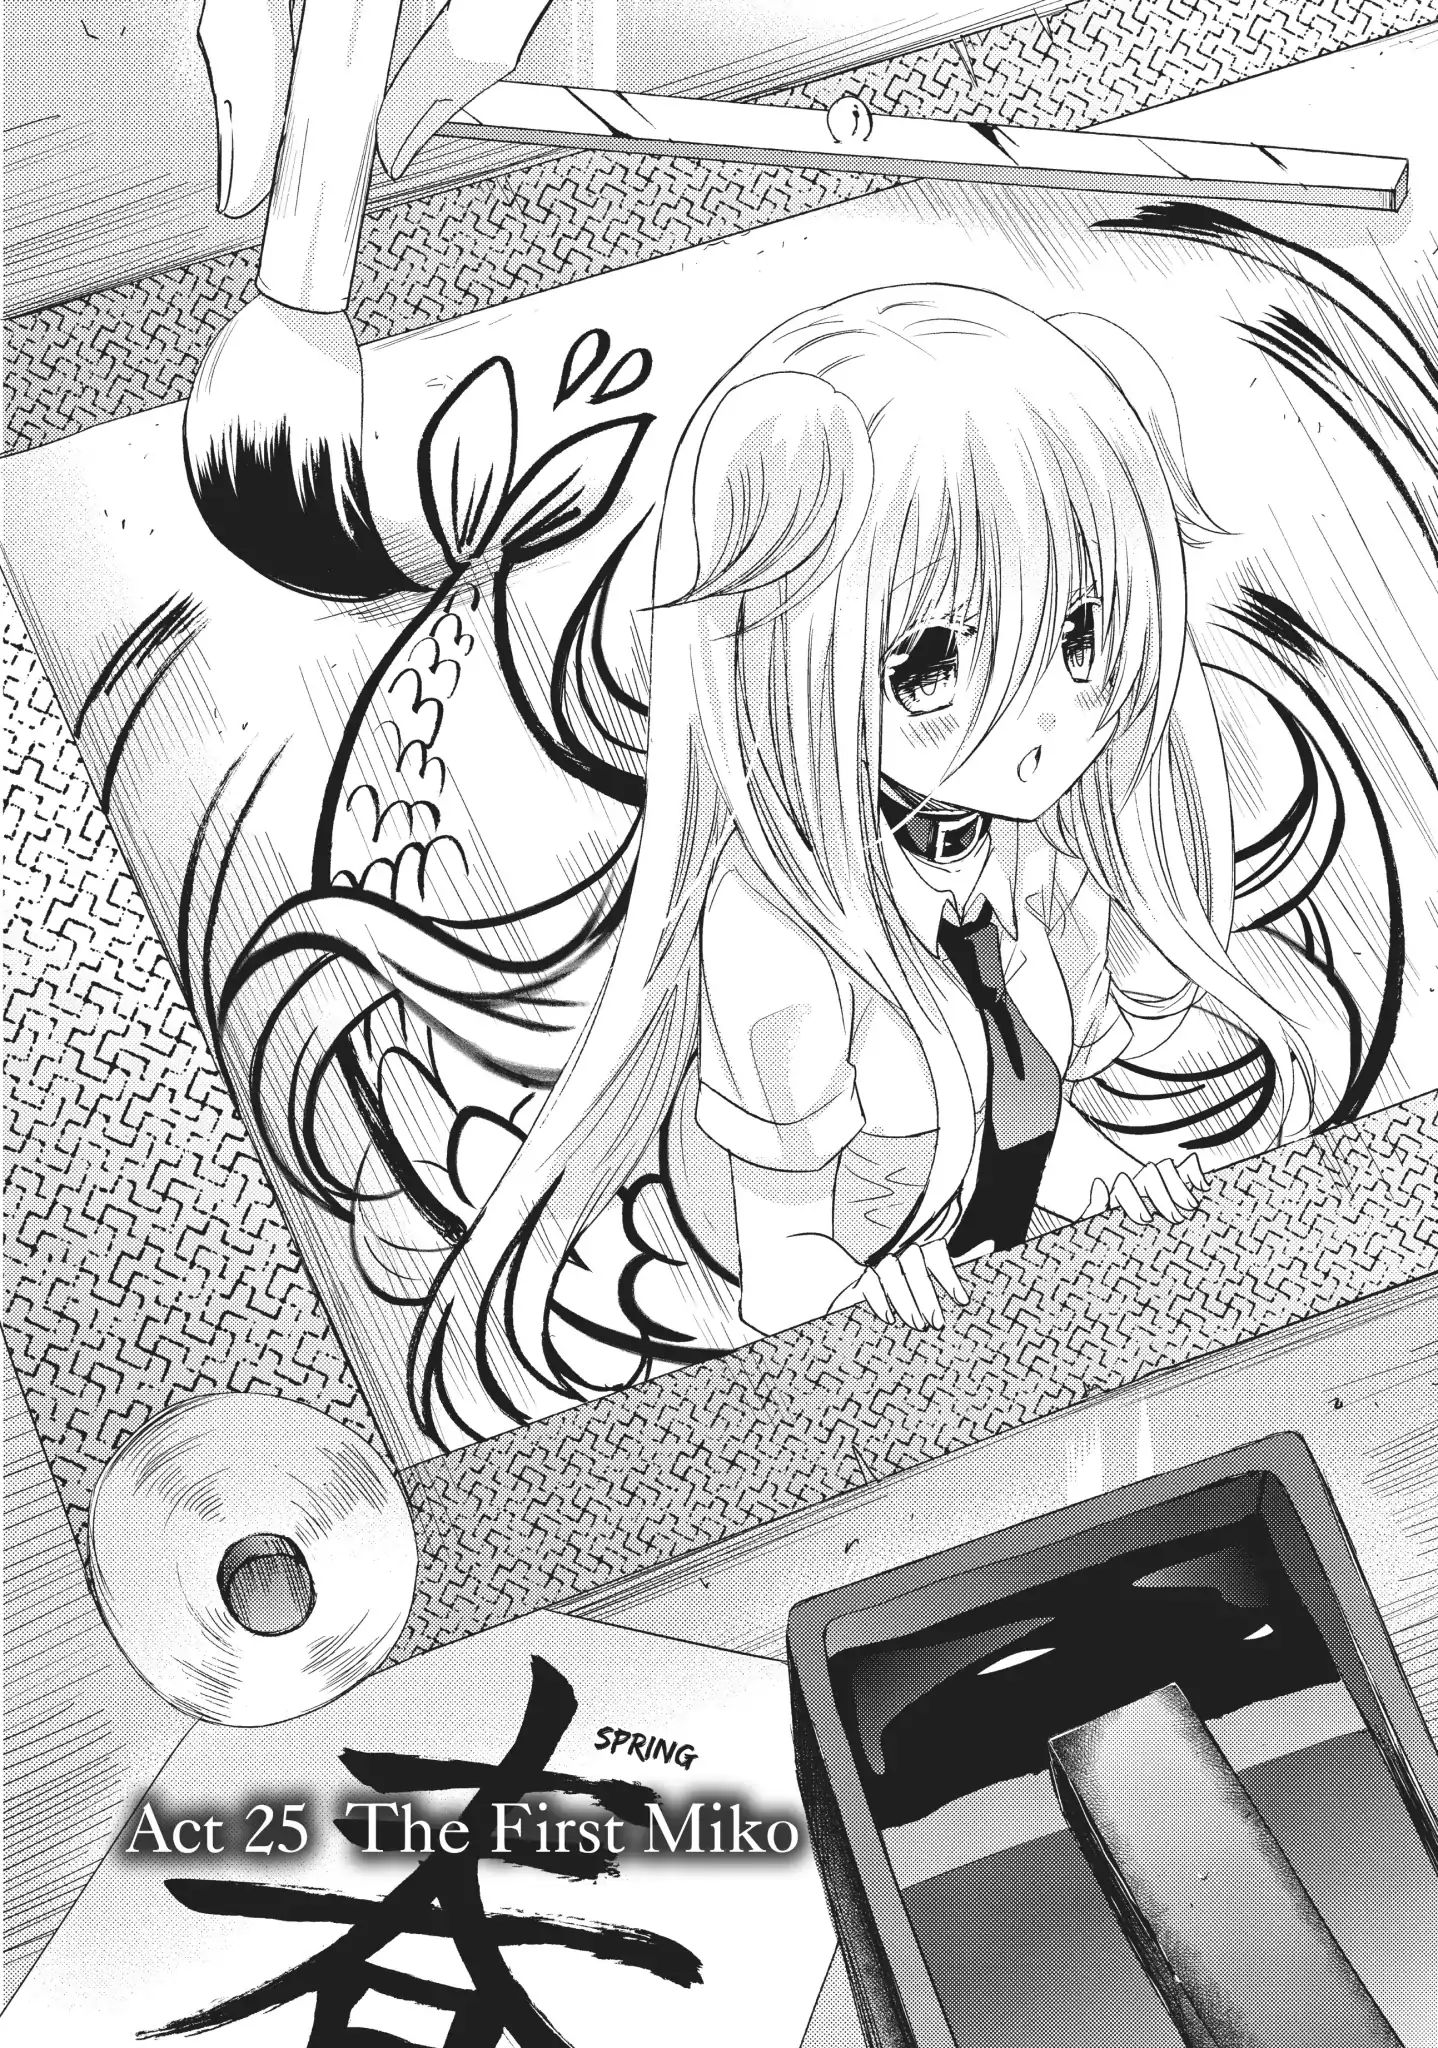 Kamikami Kaeshi Vol.6 Chapter 25: The First Miko - Picture 1